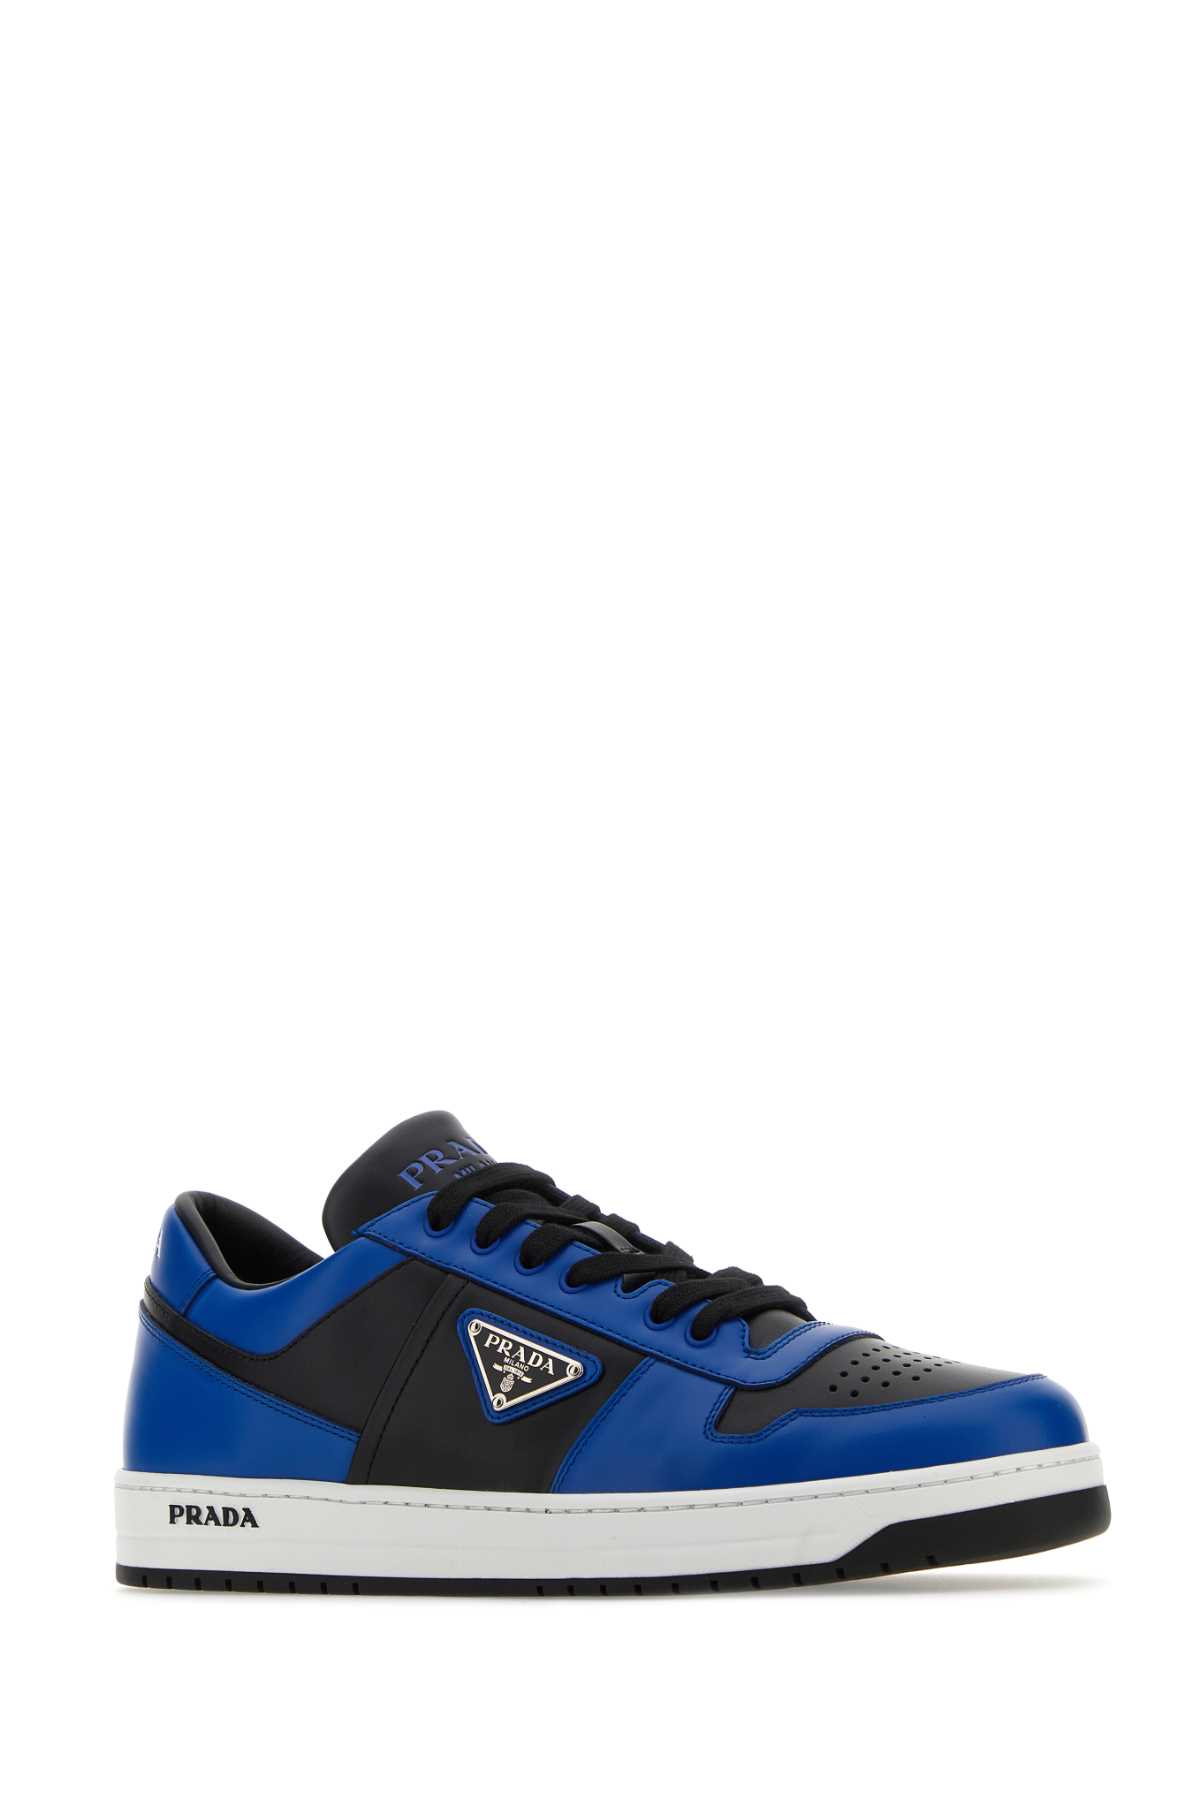 Prada Two-tone Leather Downtown Sneakers In Nerocobalto